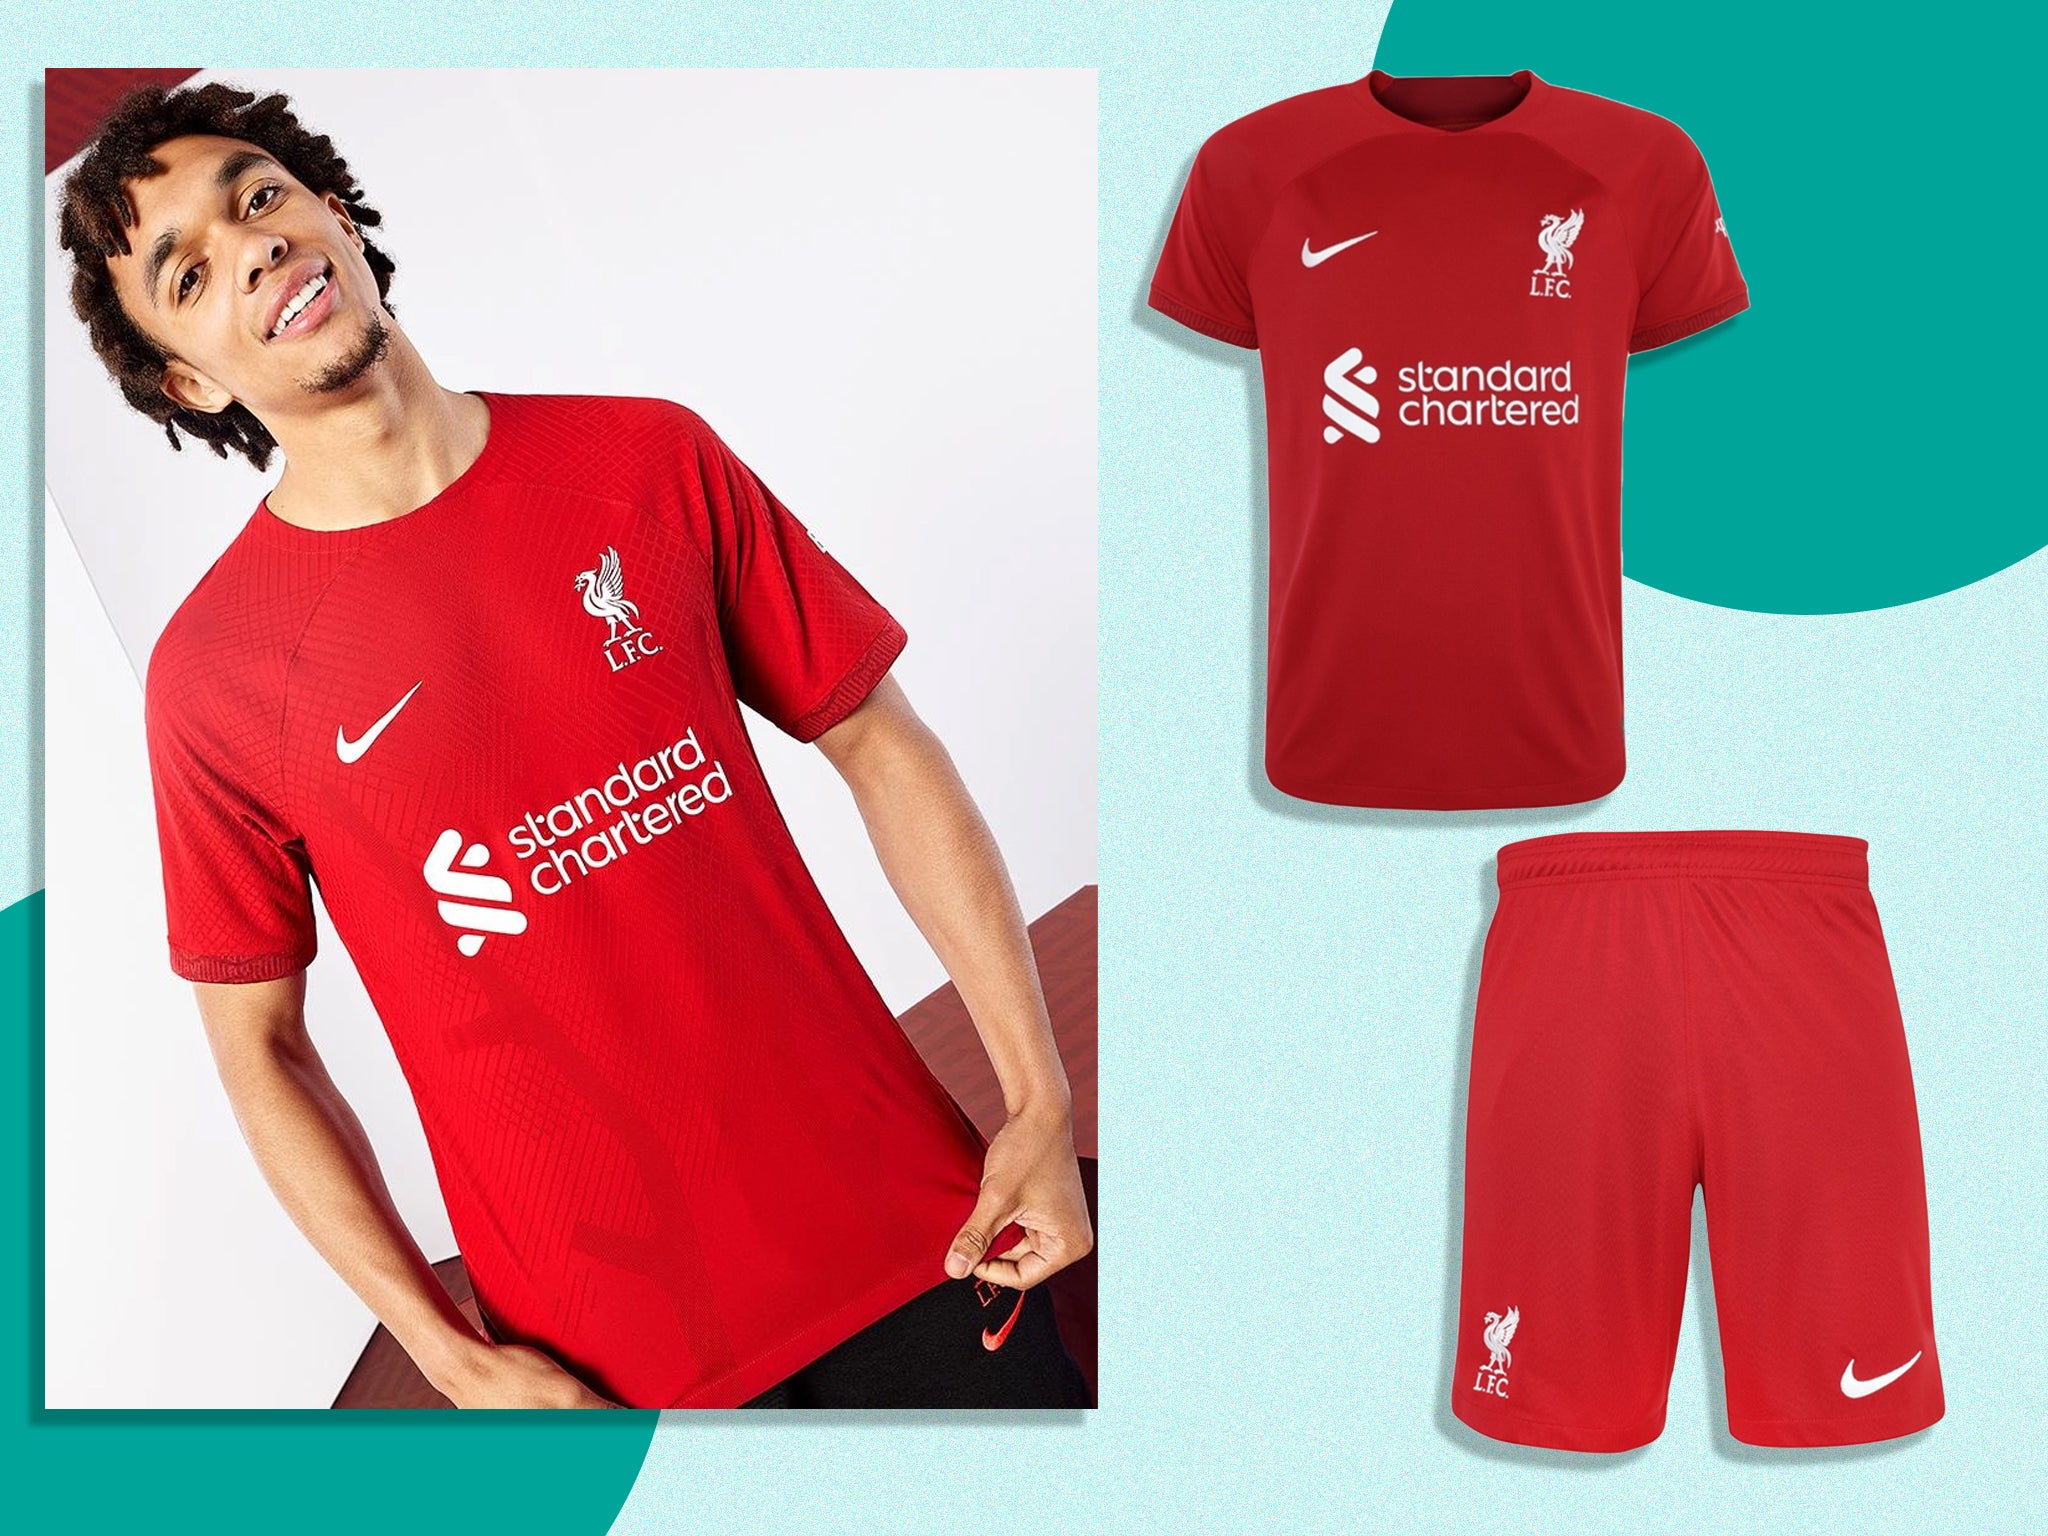 official liverpool jersey 22 23